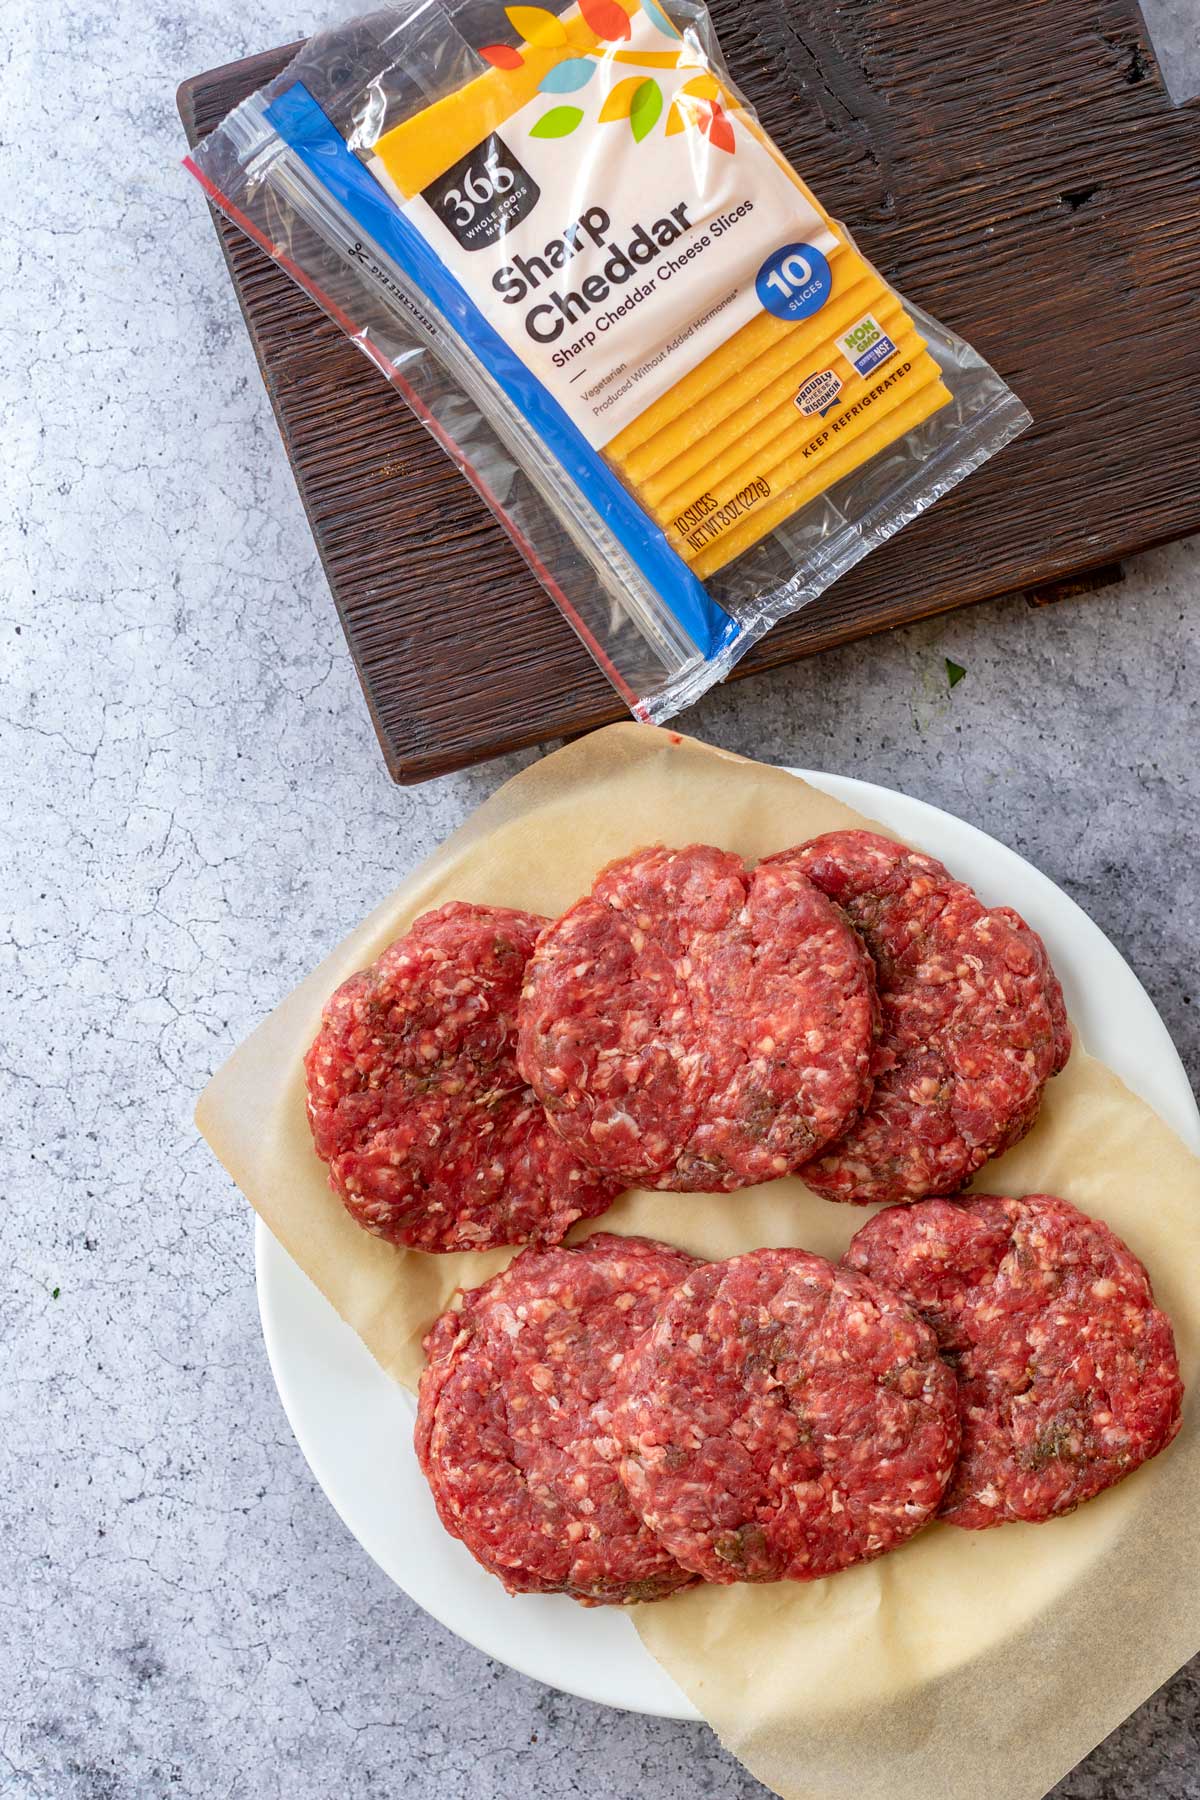 Photo of prepared hamburger patties sitting next to a package of sliced sharp cheddar.